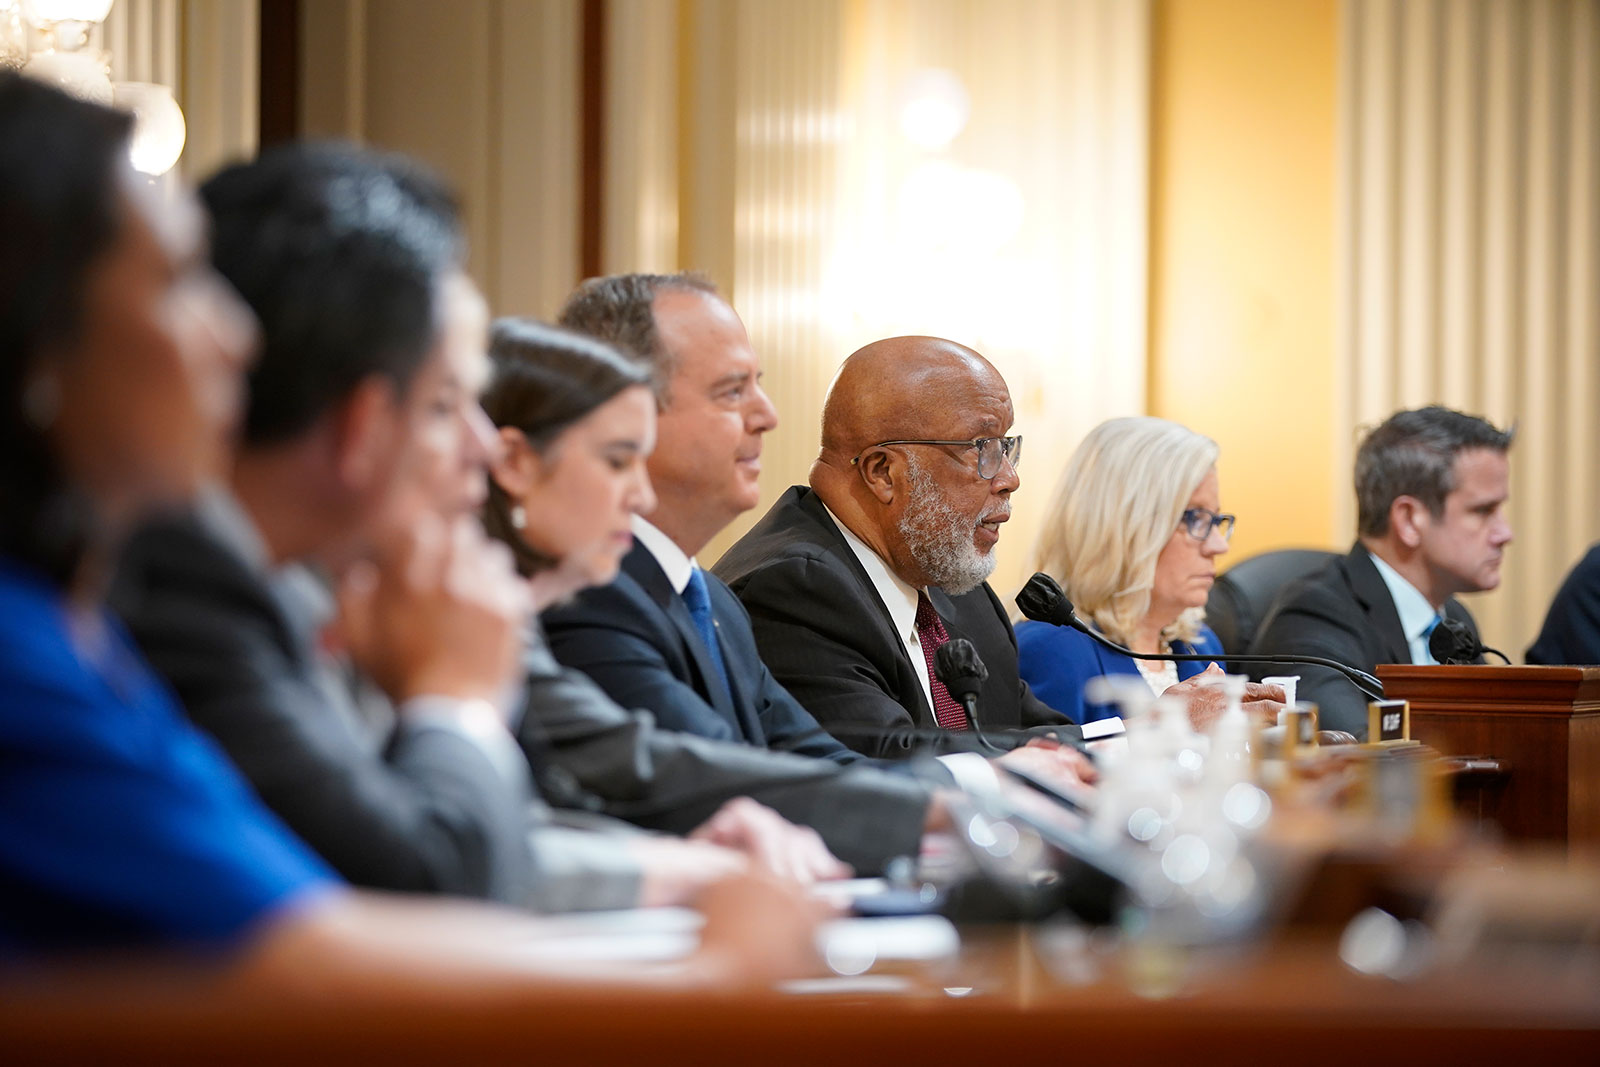 US Rep. Bennie Thompson, the committee chairman, gives opening remarks during Tuesday's hearing.